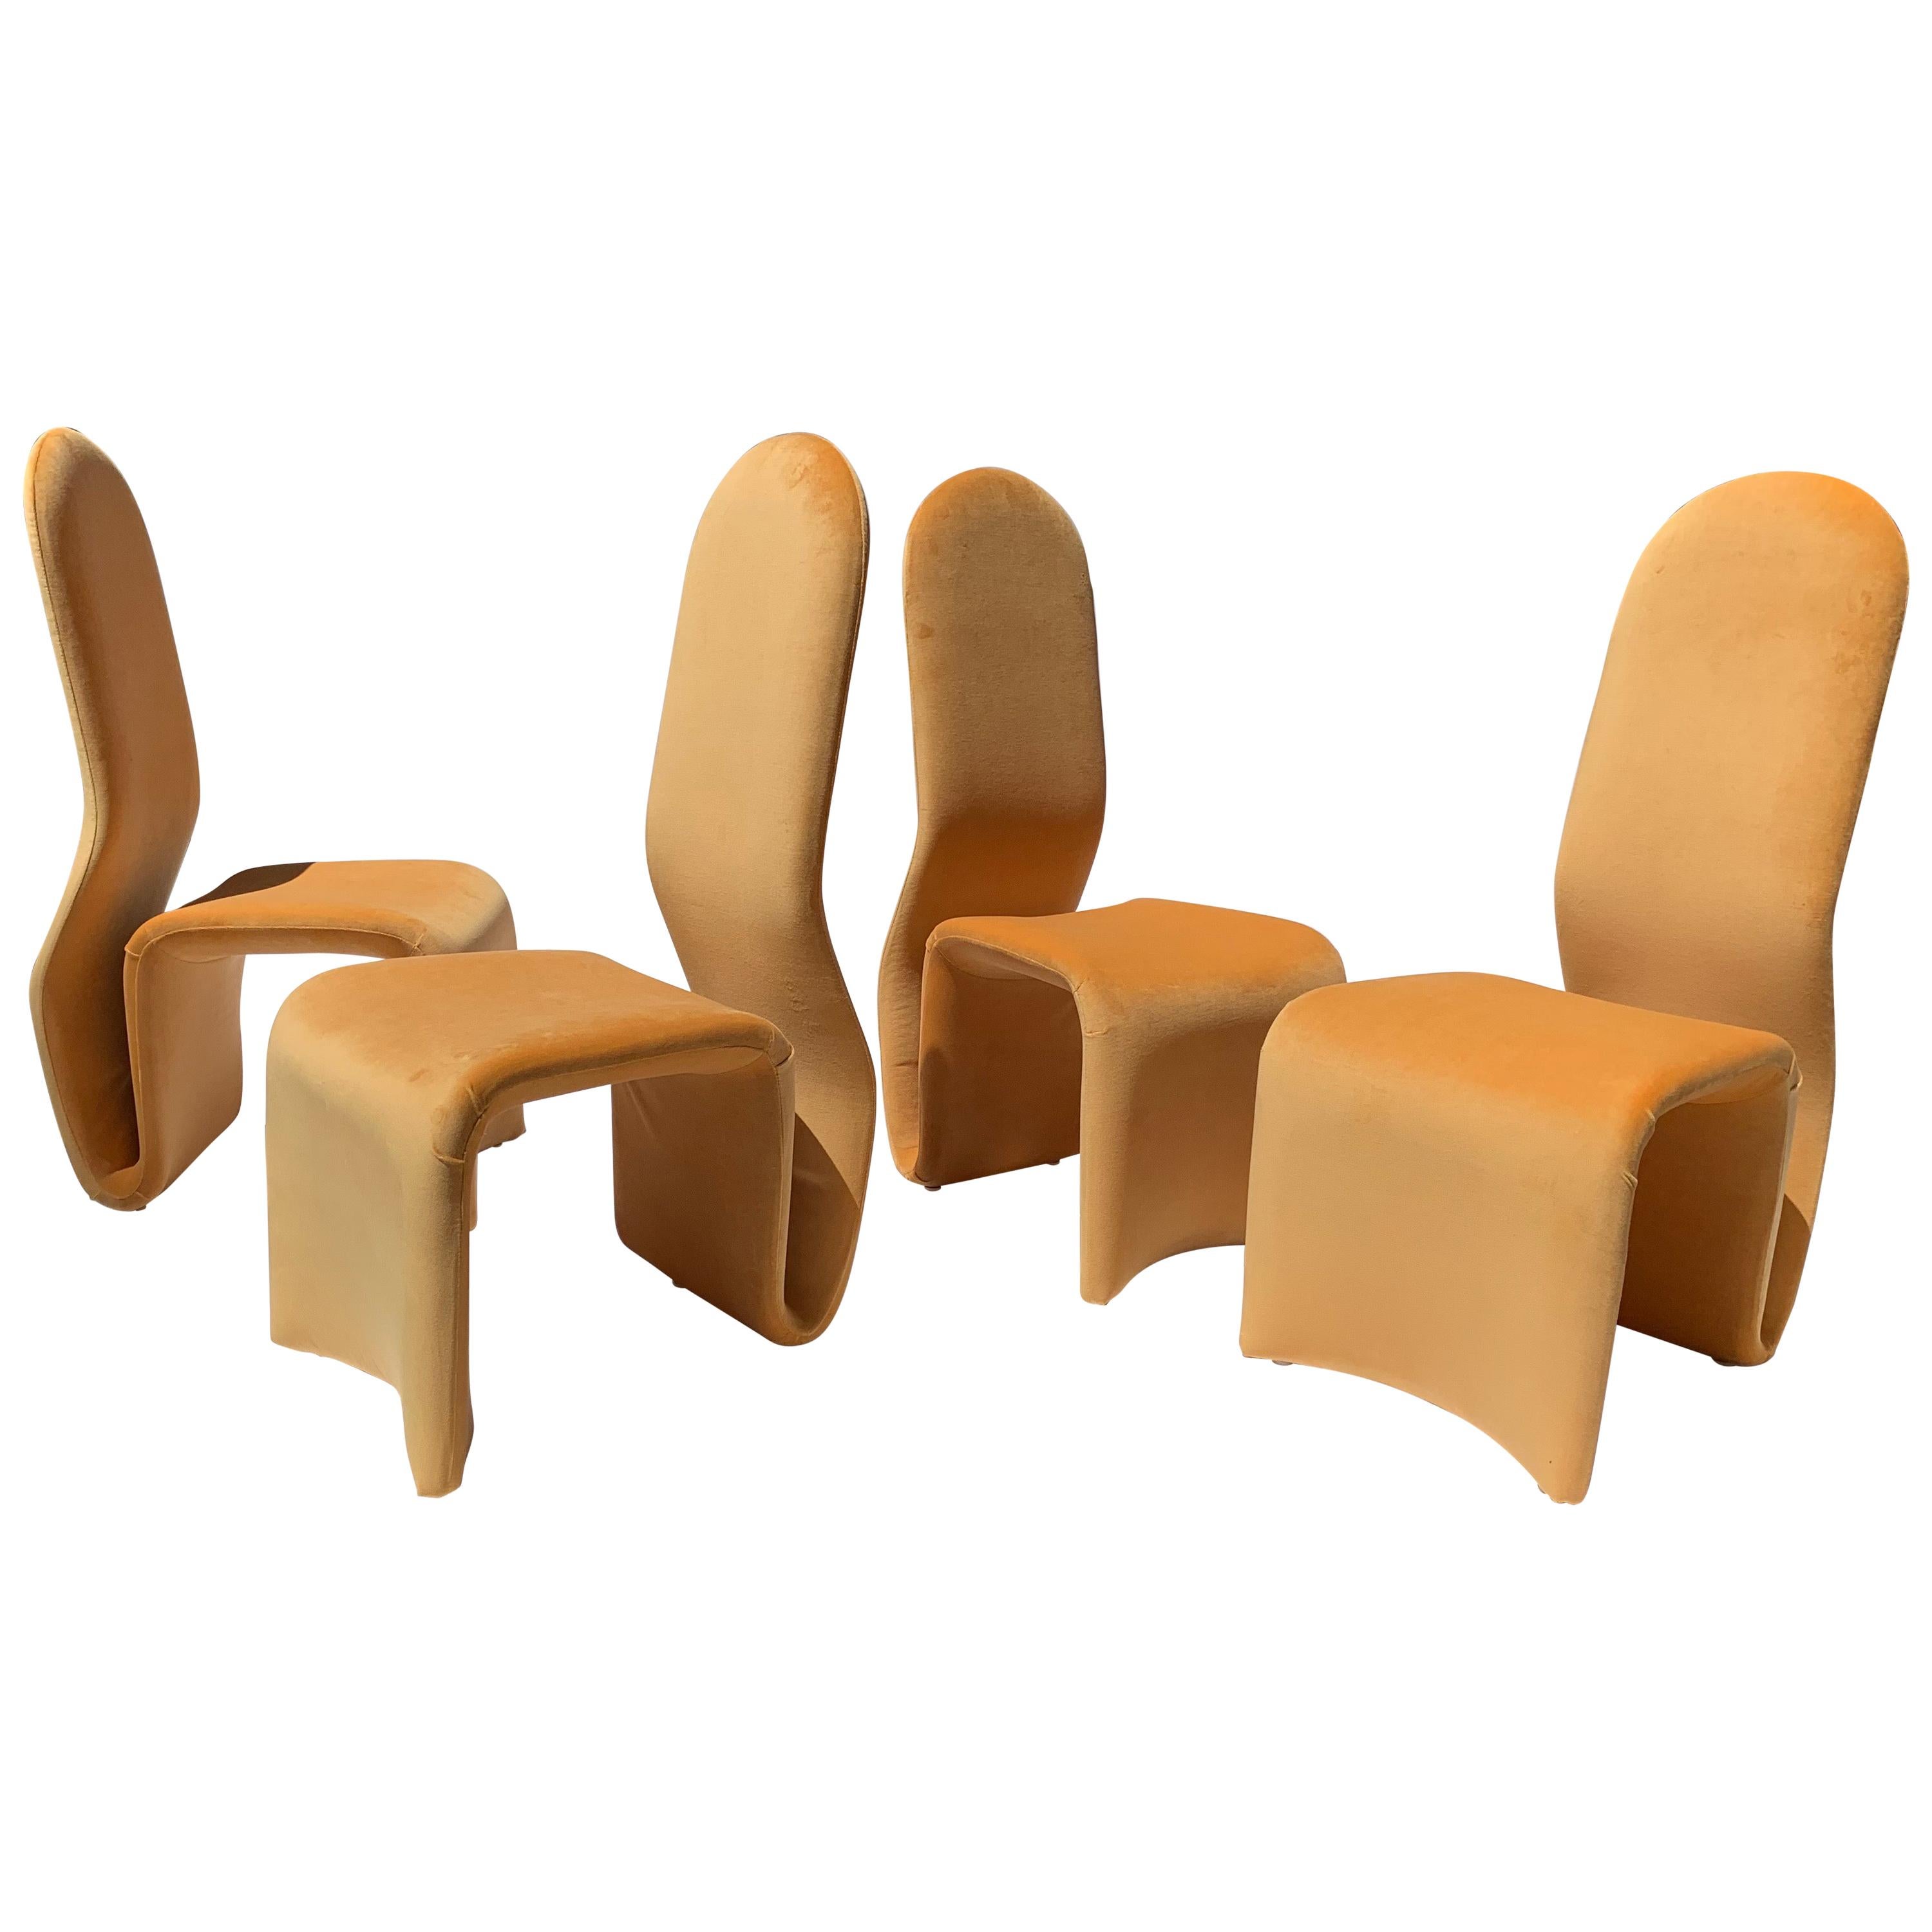 Set of 4 Sculptural “Ribbon” Dining Chairs in the Style of Olivier Mourgue